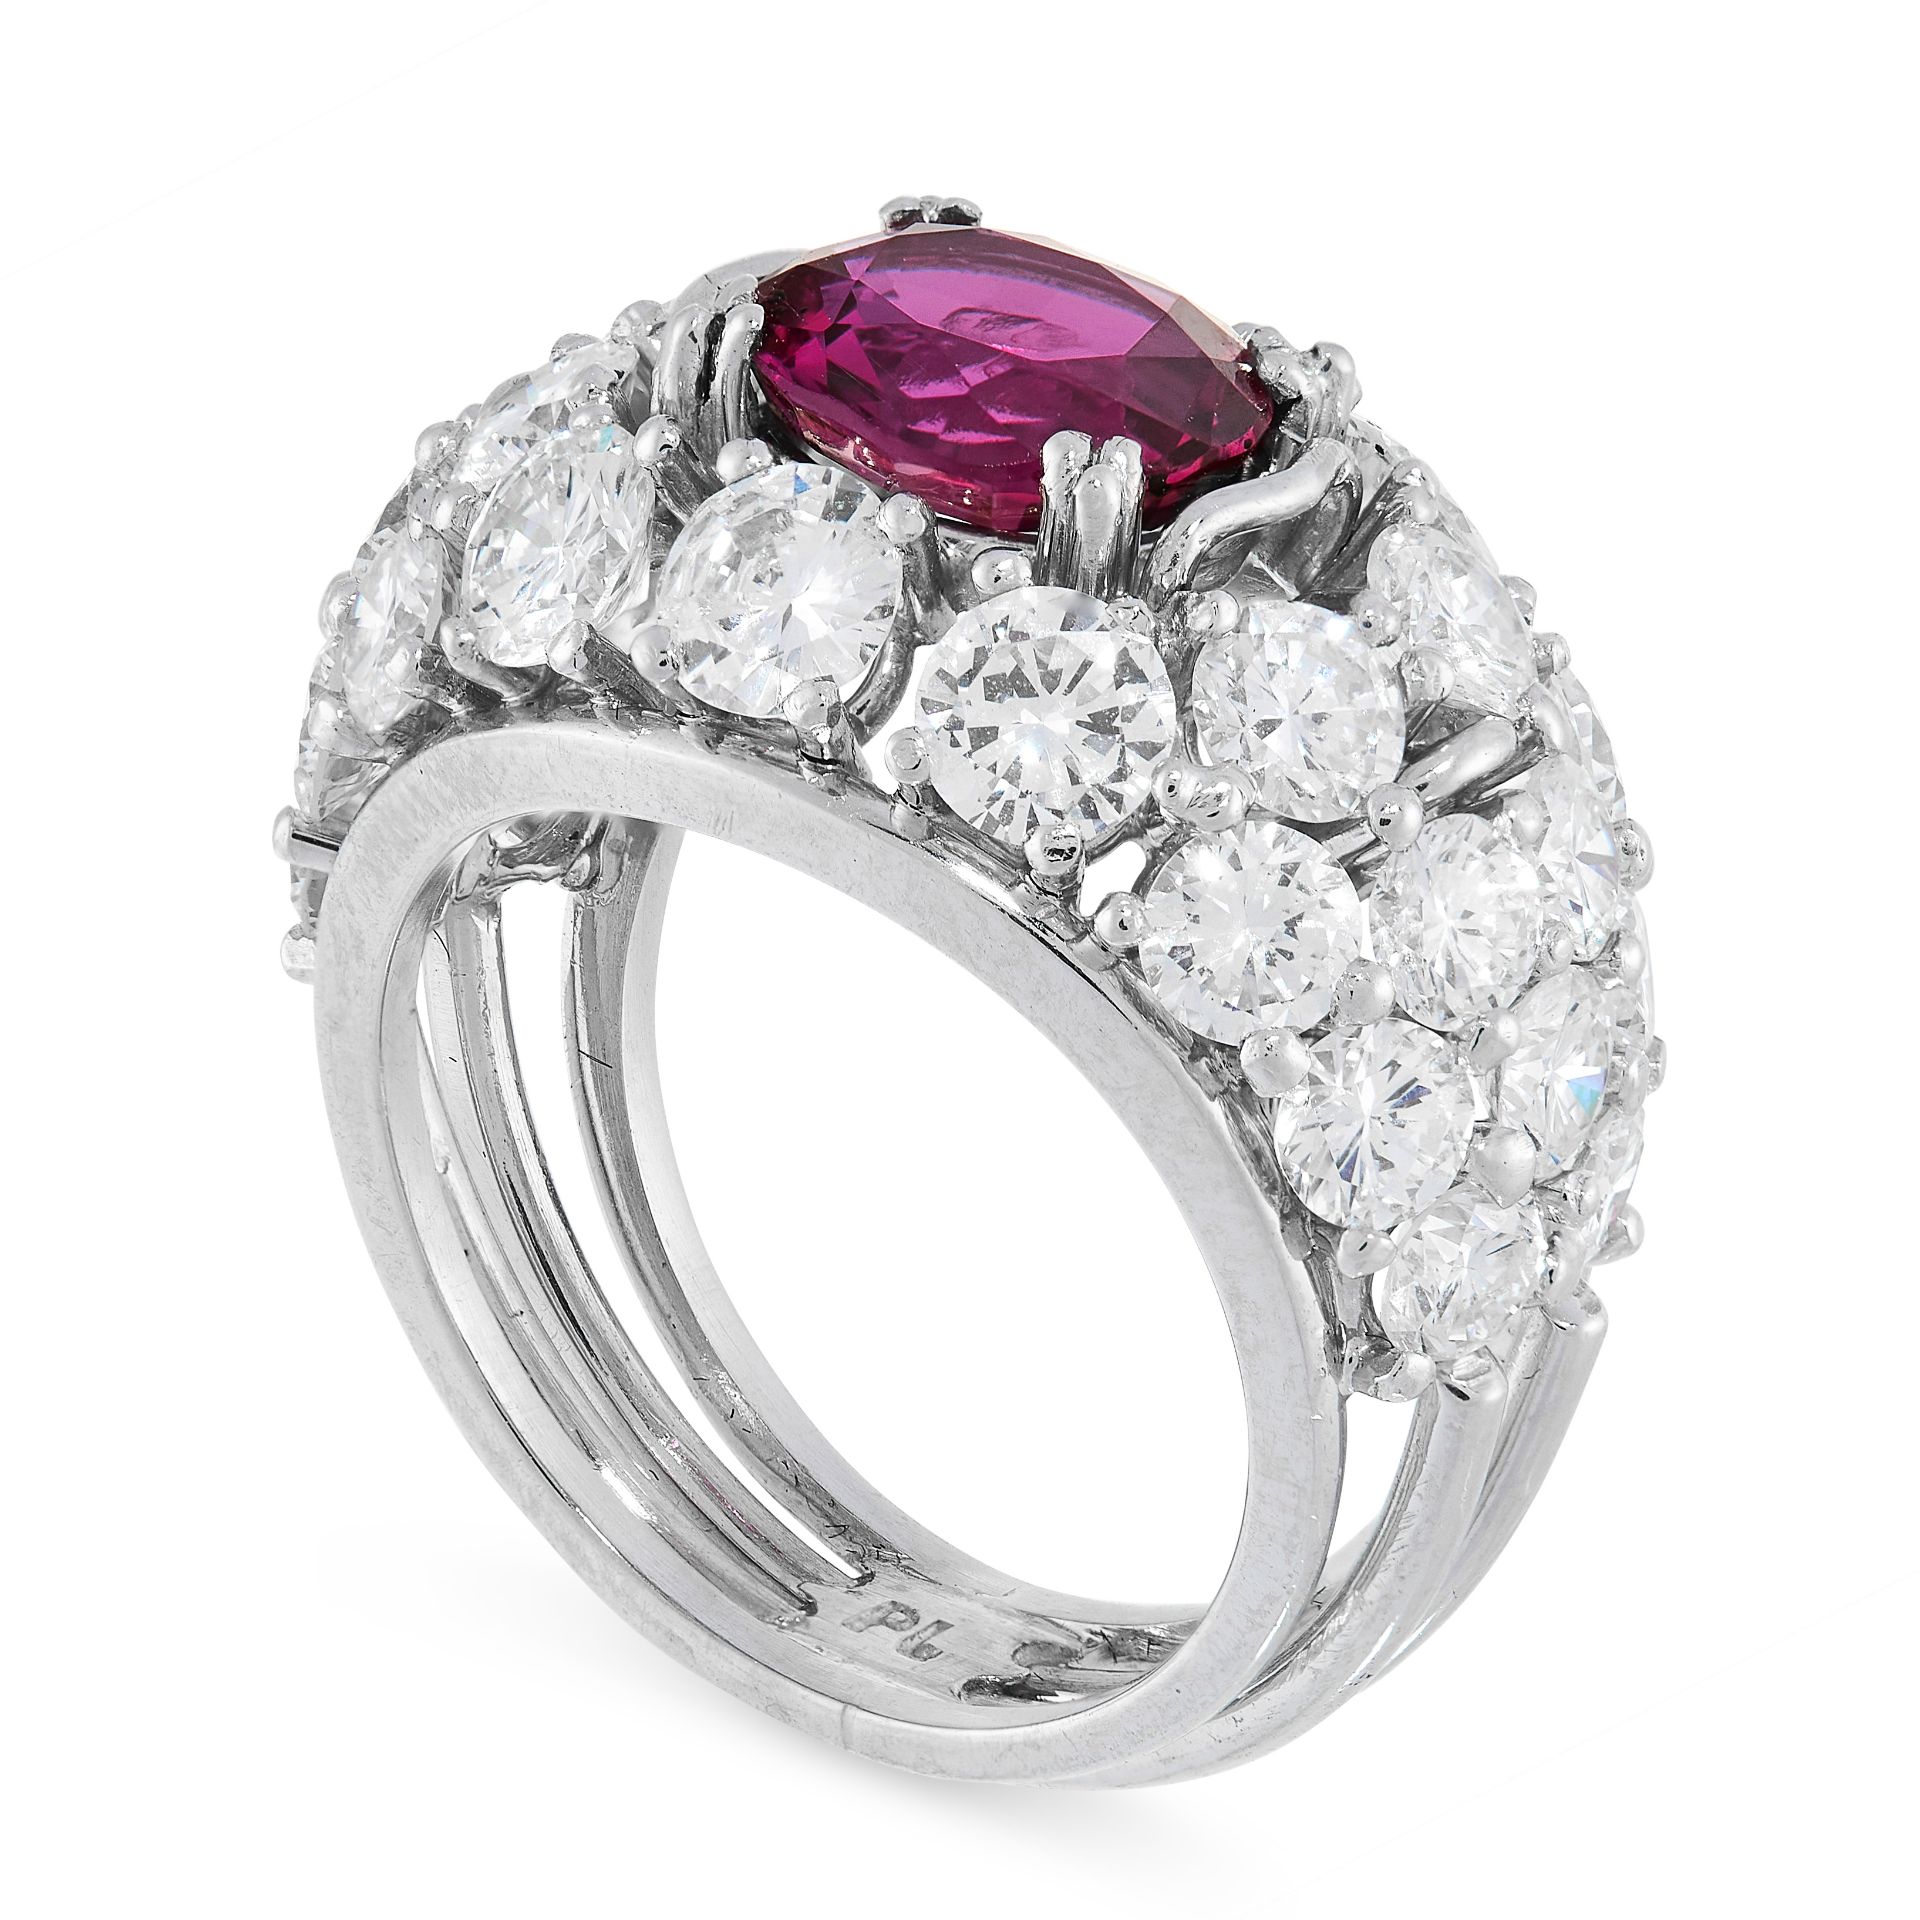 RUBY AND DIAMOND RING claw-set with an oval ruby weighing 2.40 carats, within a bombe mount set to - Image 2 of 2